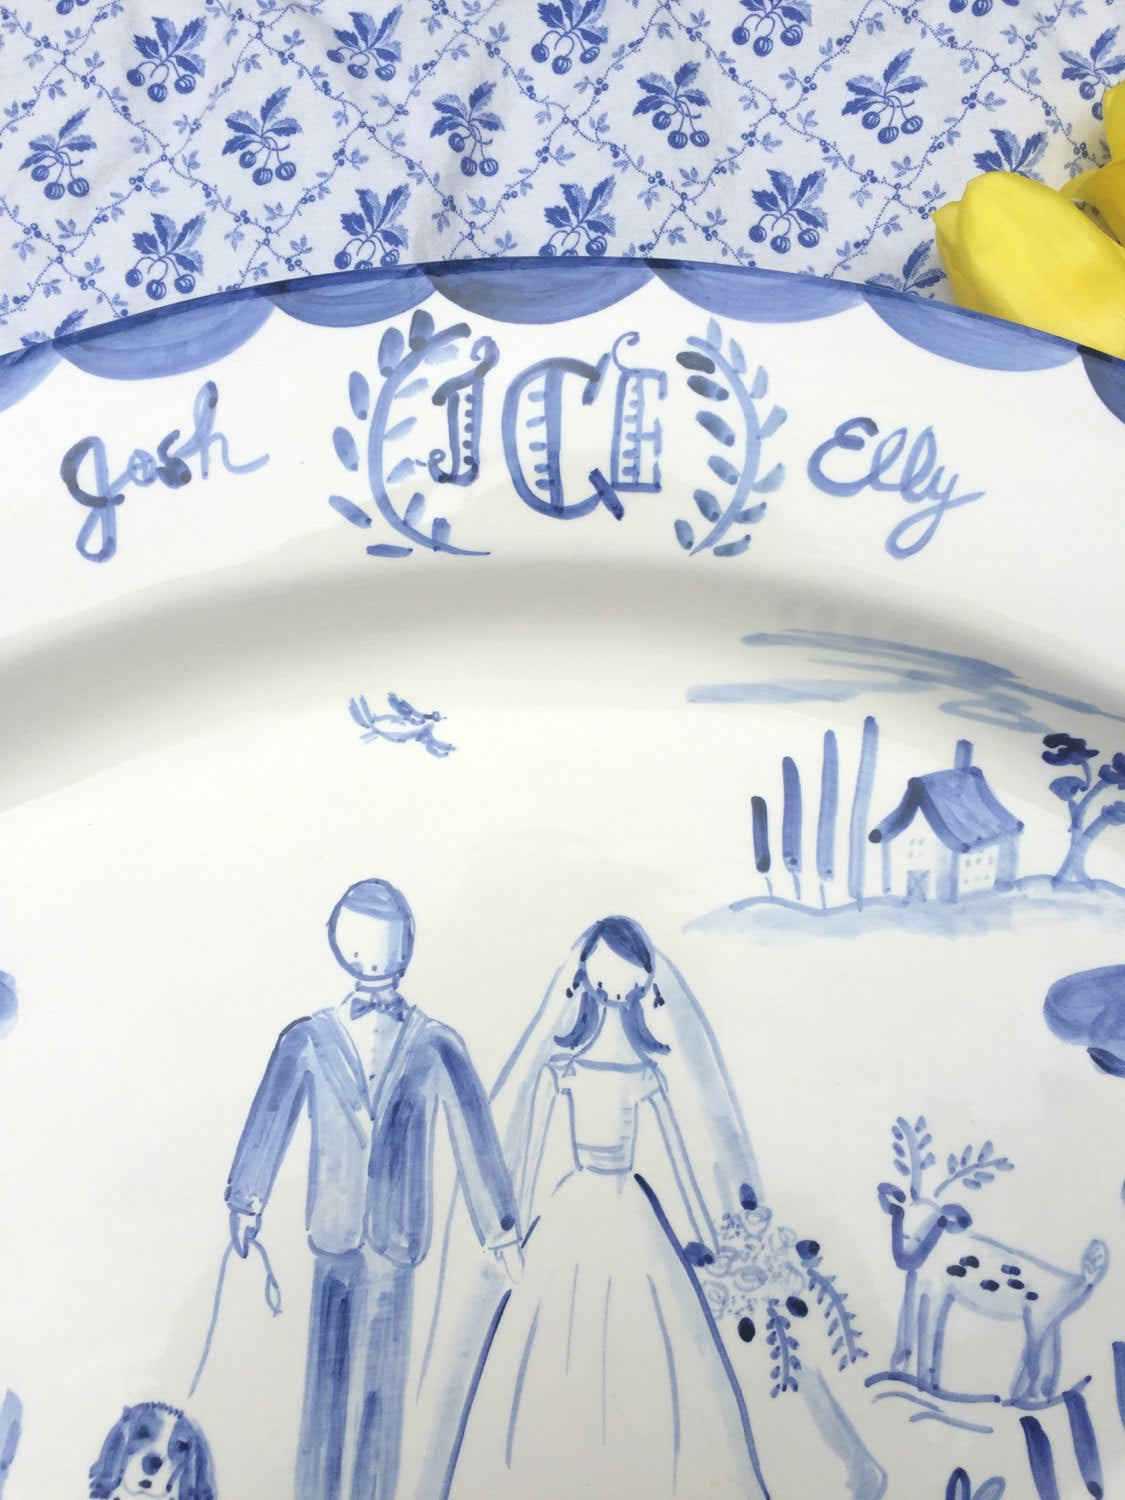 Large Custom Platter - Love is Patient, Love is Kind - Tricia Lowenfield Design